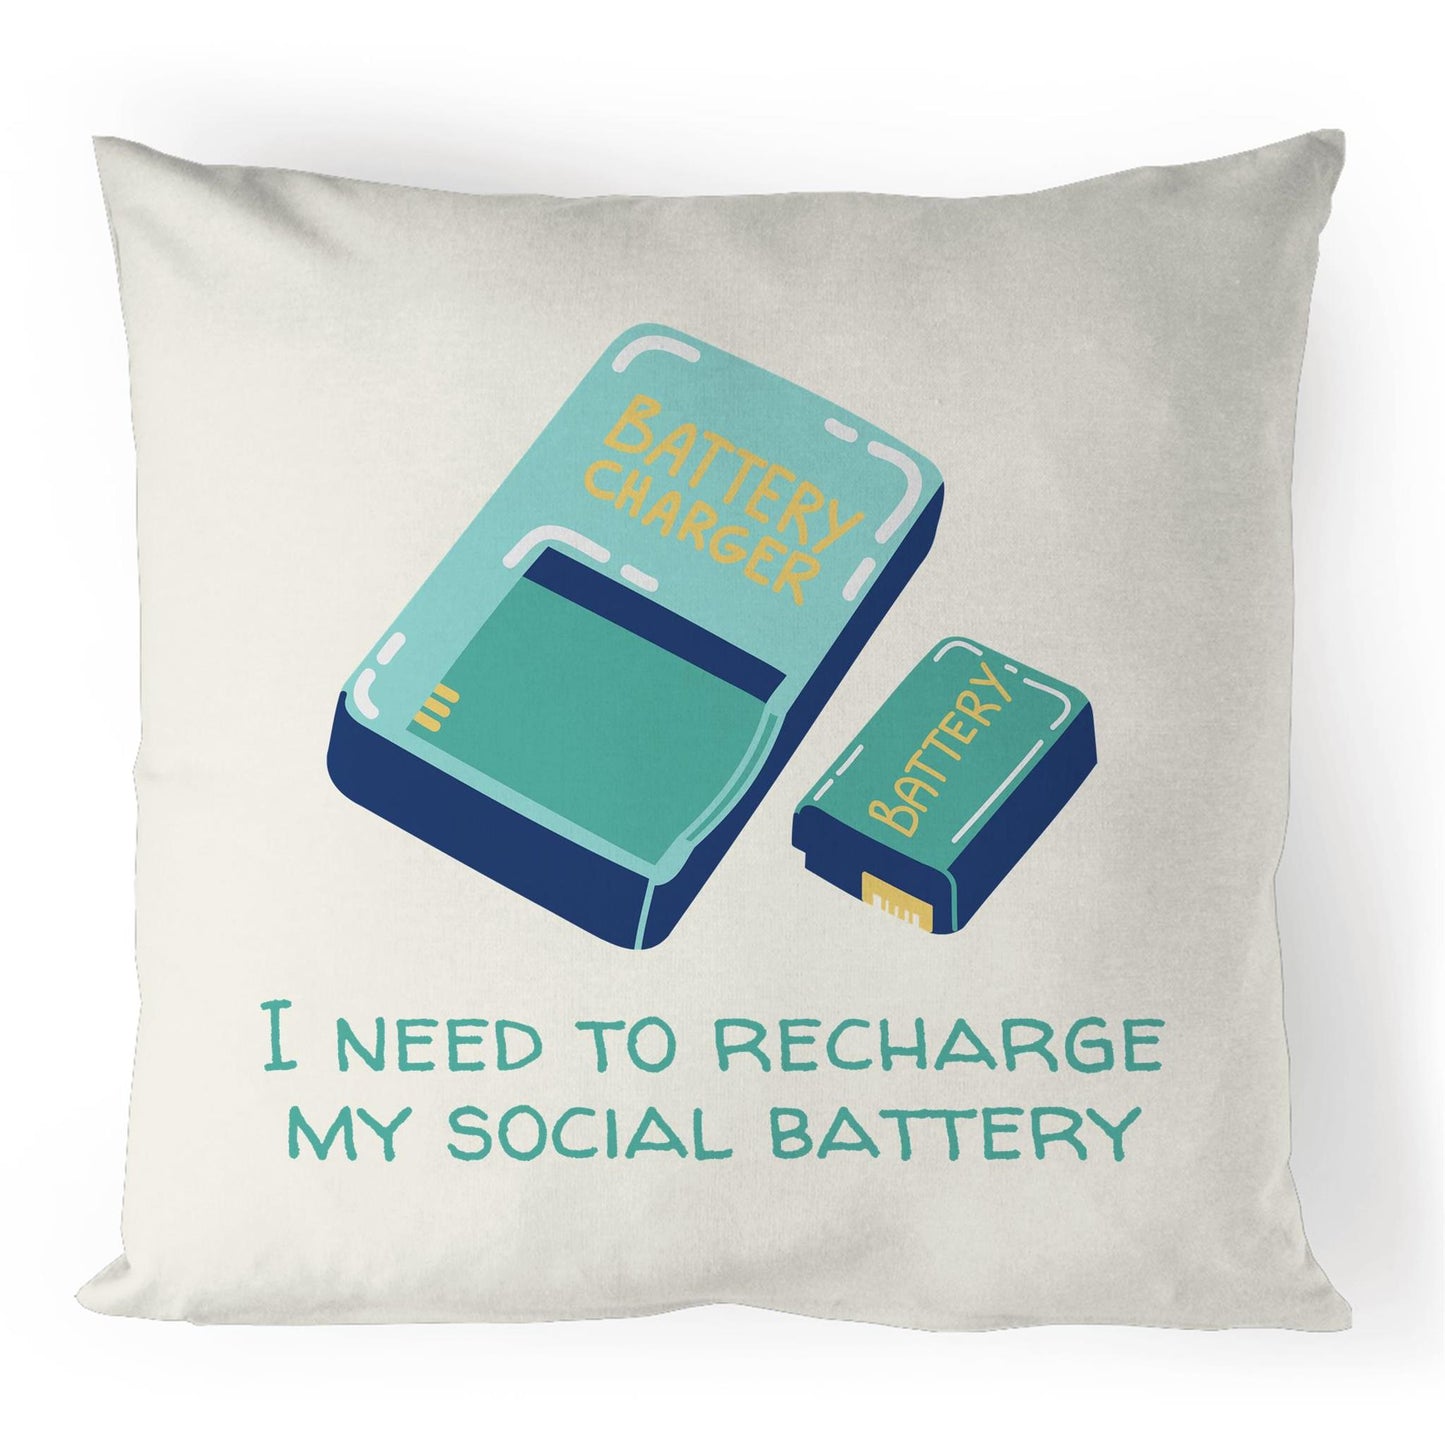 Recharge My Social Battery - 100% Linen Cushion Cover Natural One-Size Linen Cushion Cover Funny